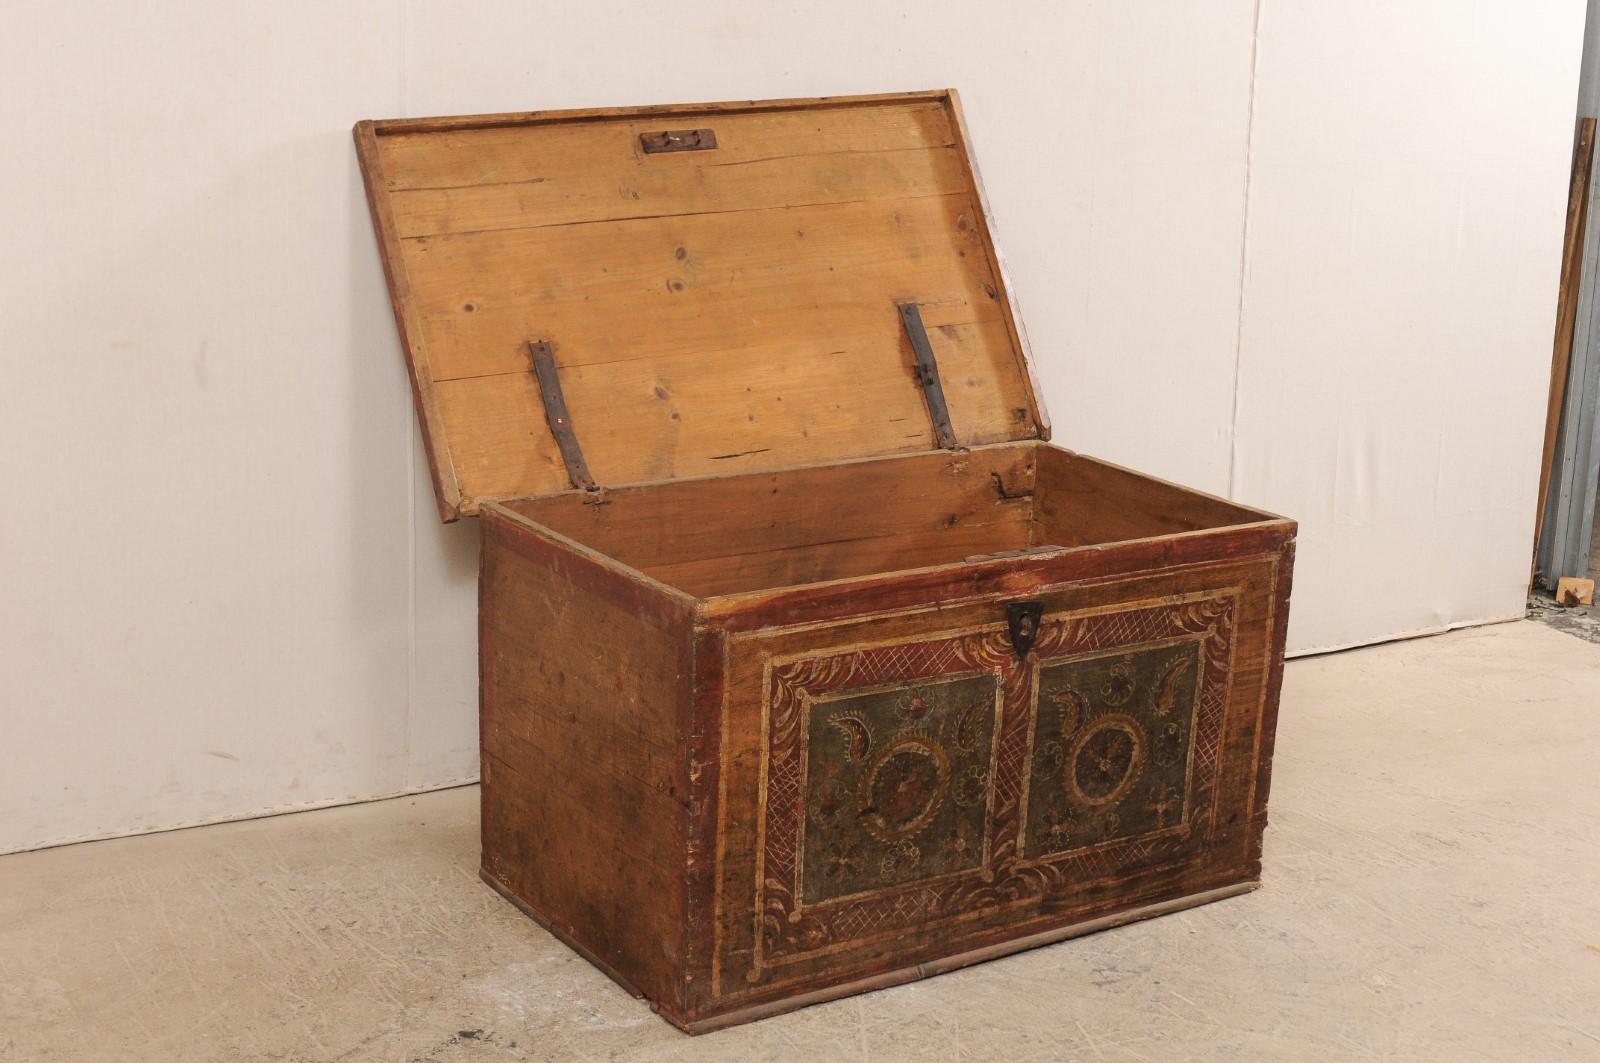 19th Century European Hand Painted Wooden Coffer Trunk In Good Condition For Sale In Atlanta, GA